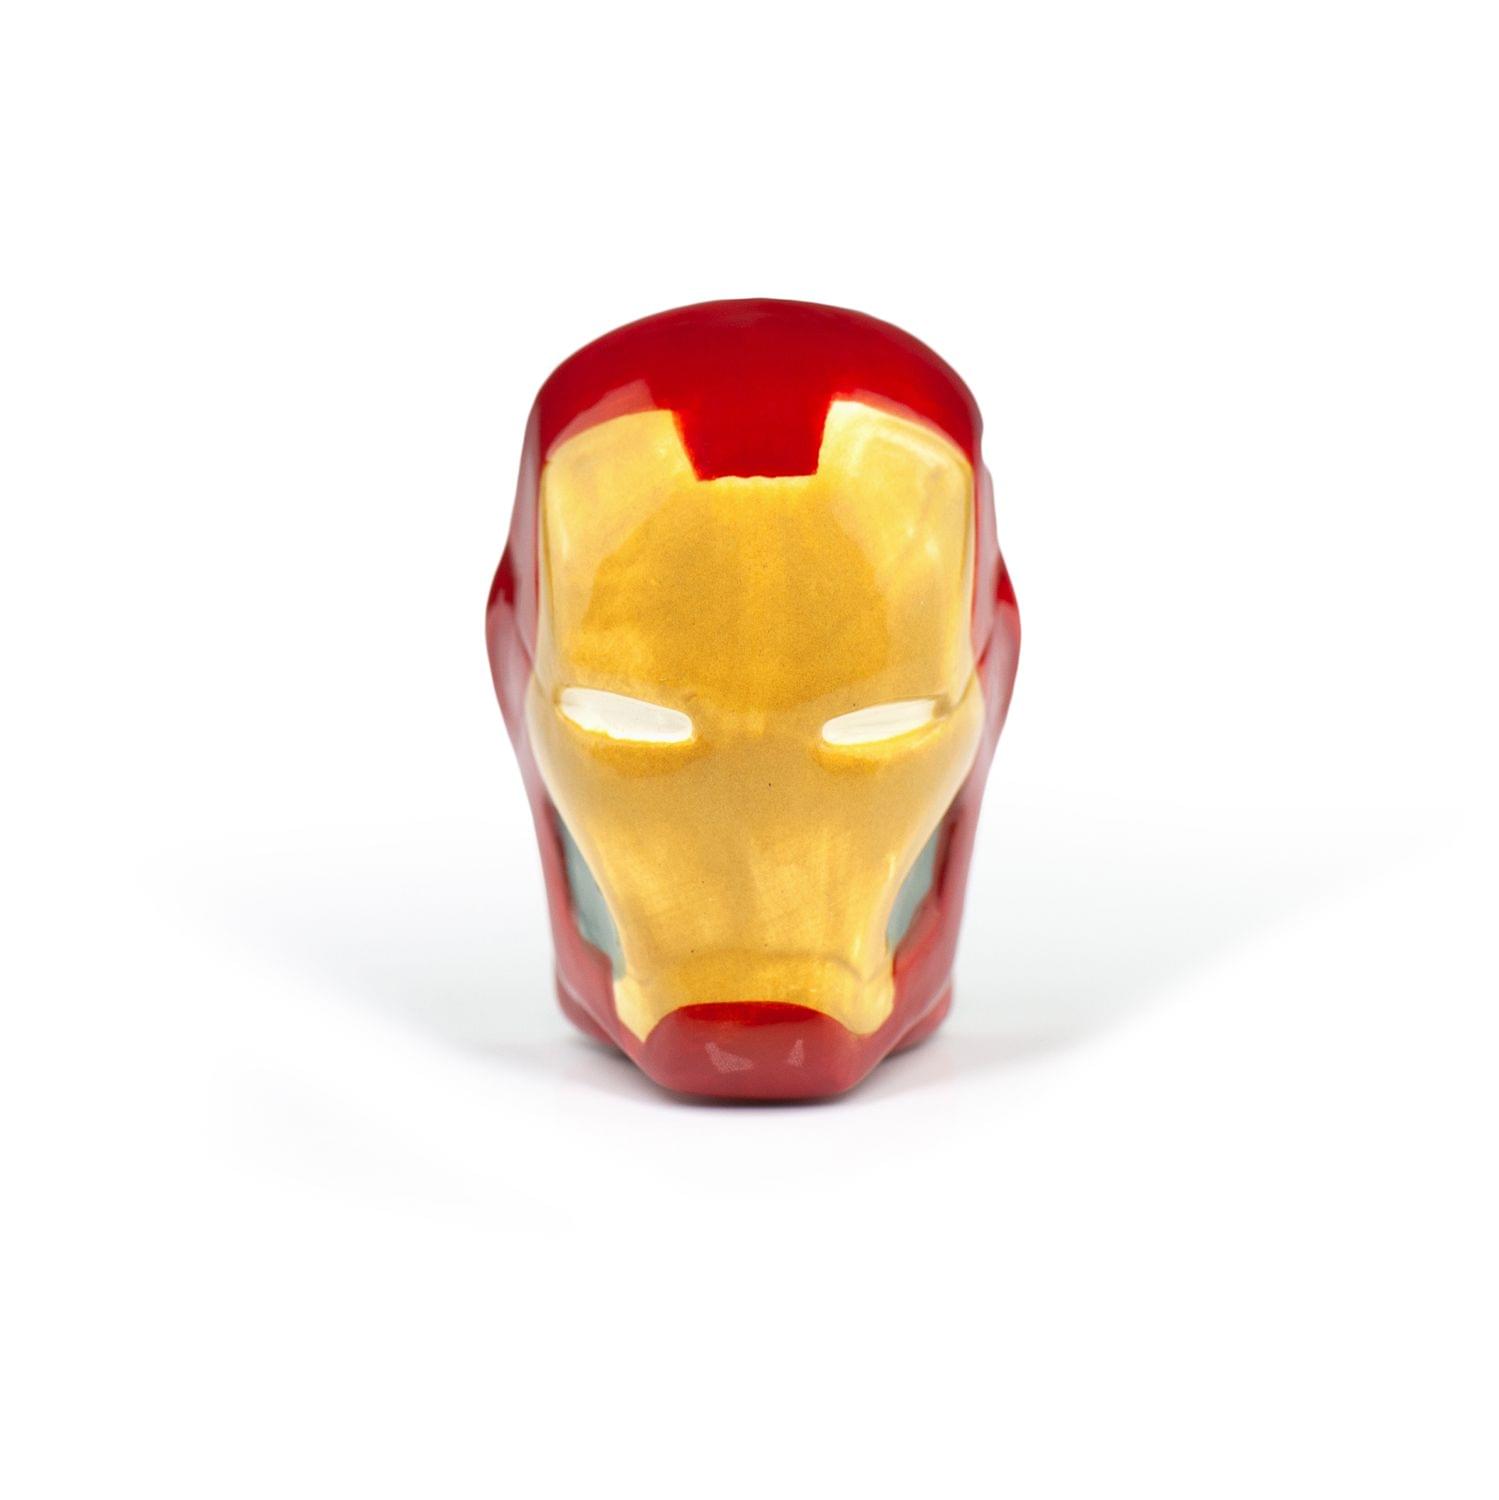 Iron Man Refrigerator Magnet , 3D Superhero Collectible Magnet , 2 Inches Tall